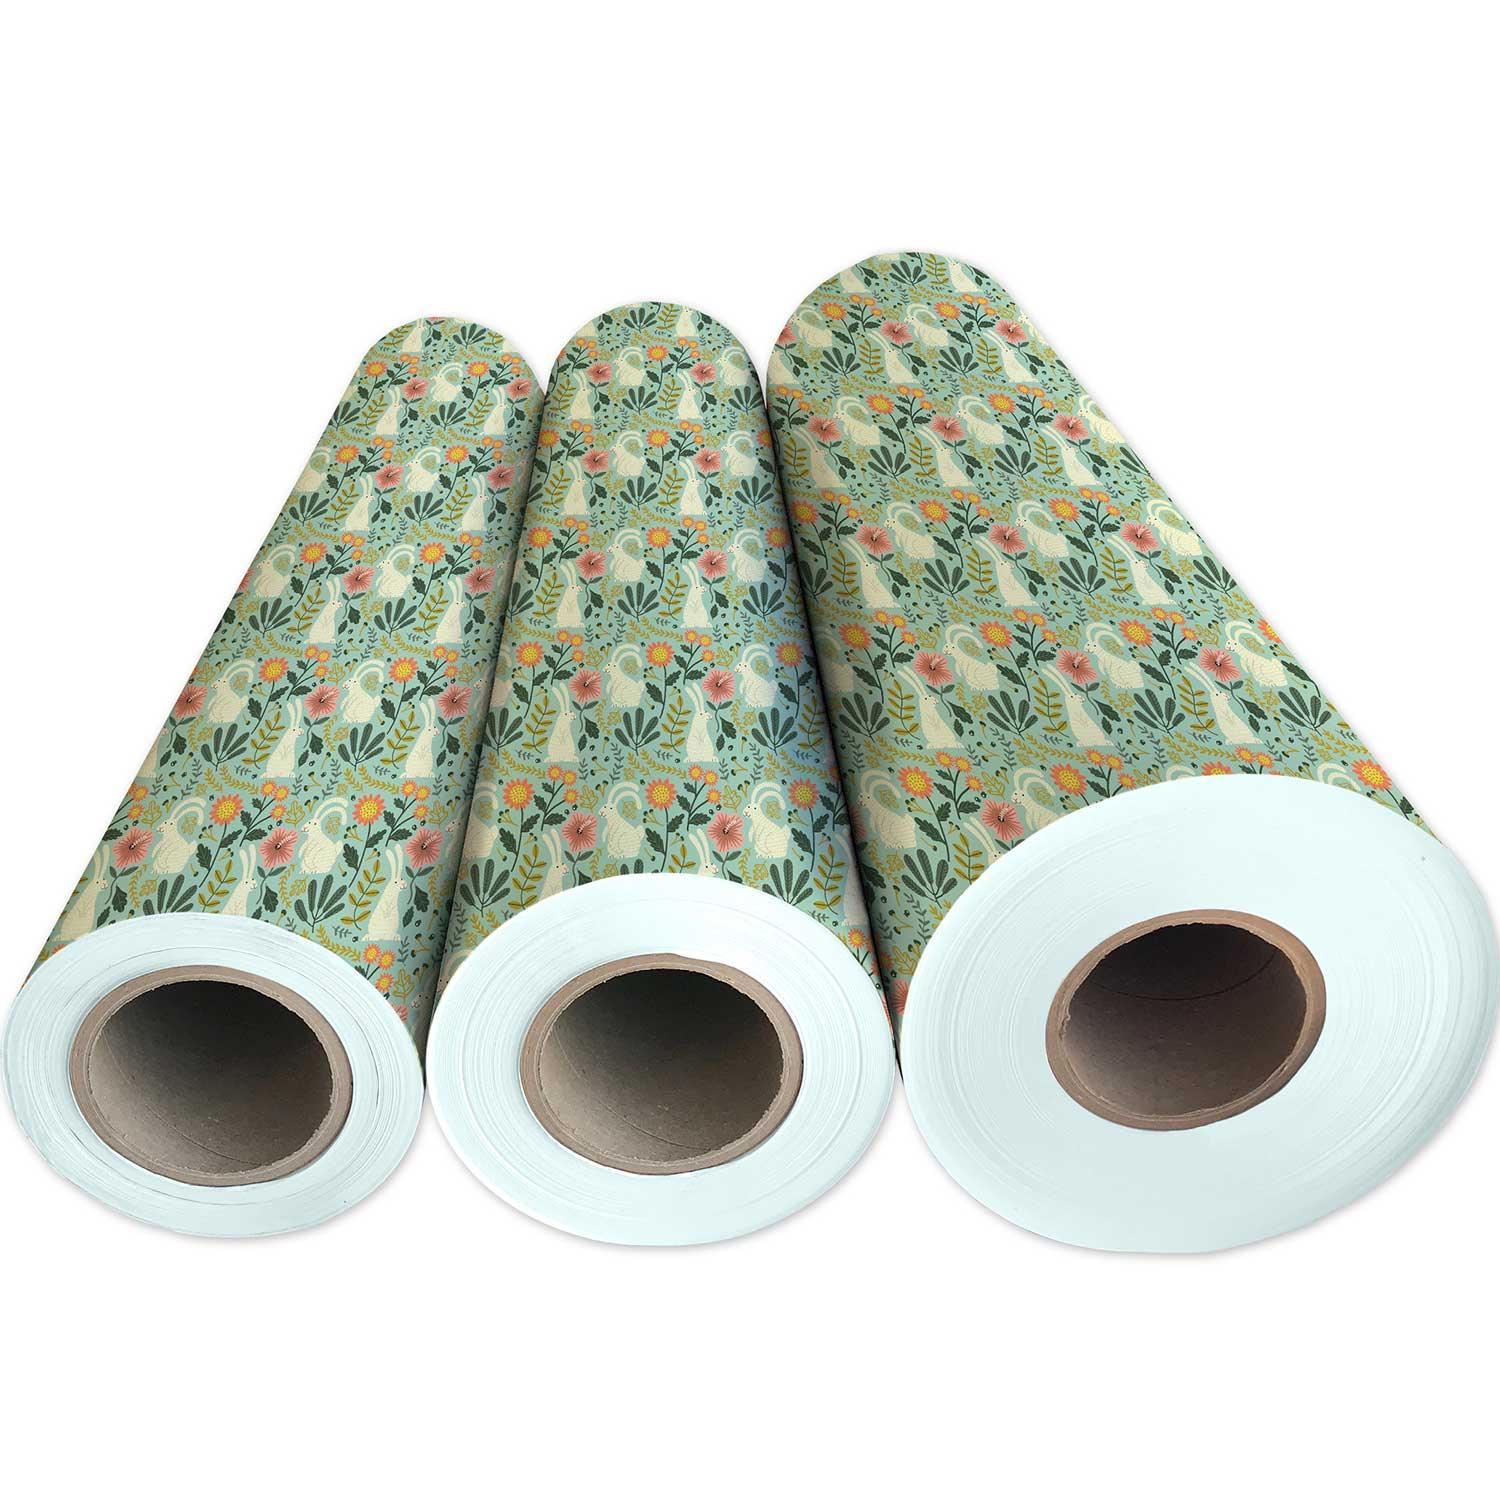 Bunny Rabbits Easter Gift Wrap by Present Paper - Vysn